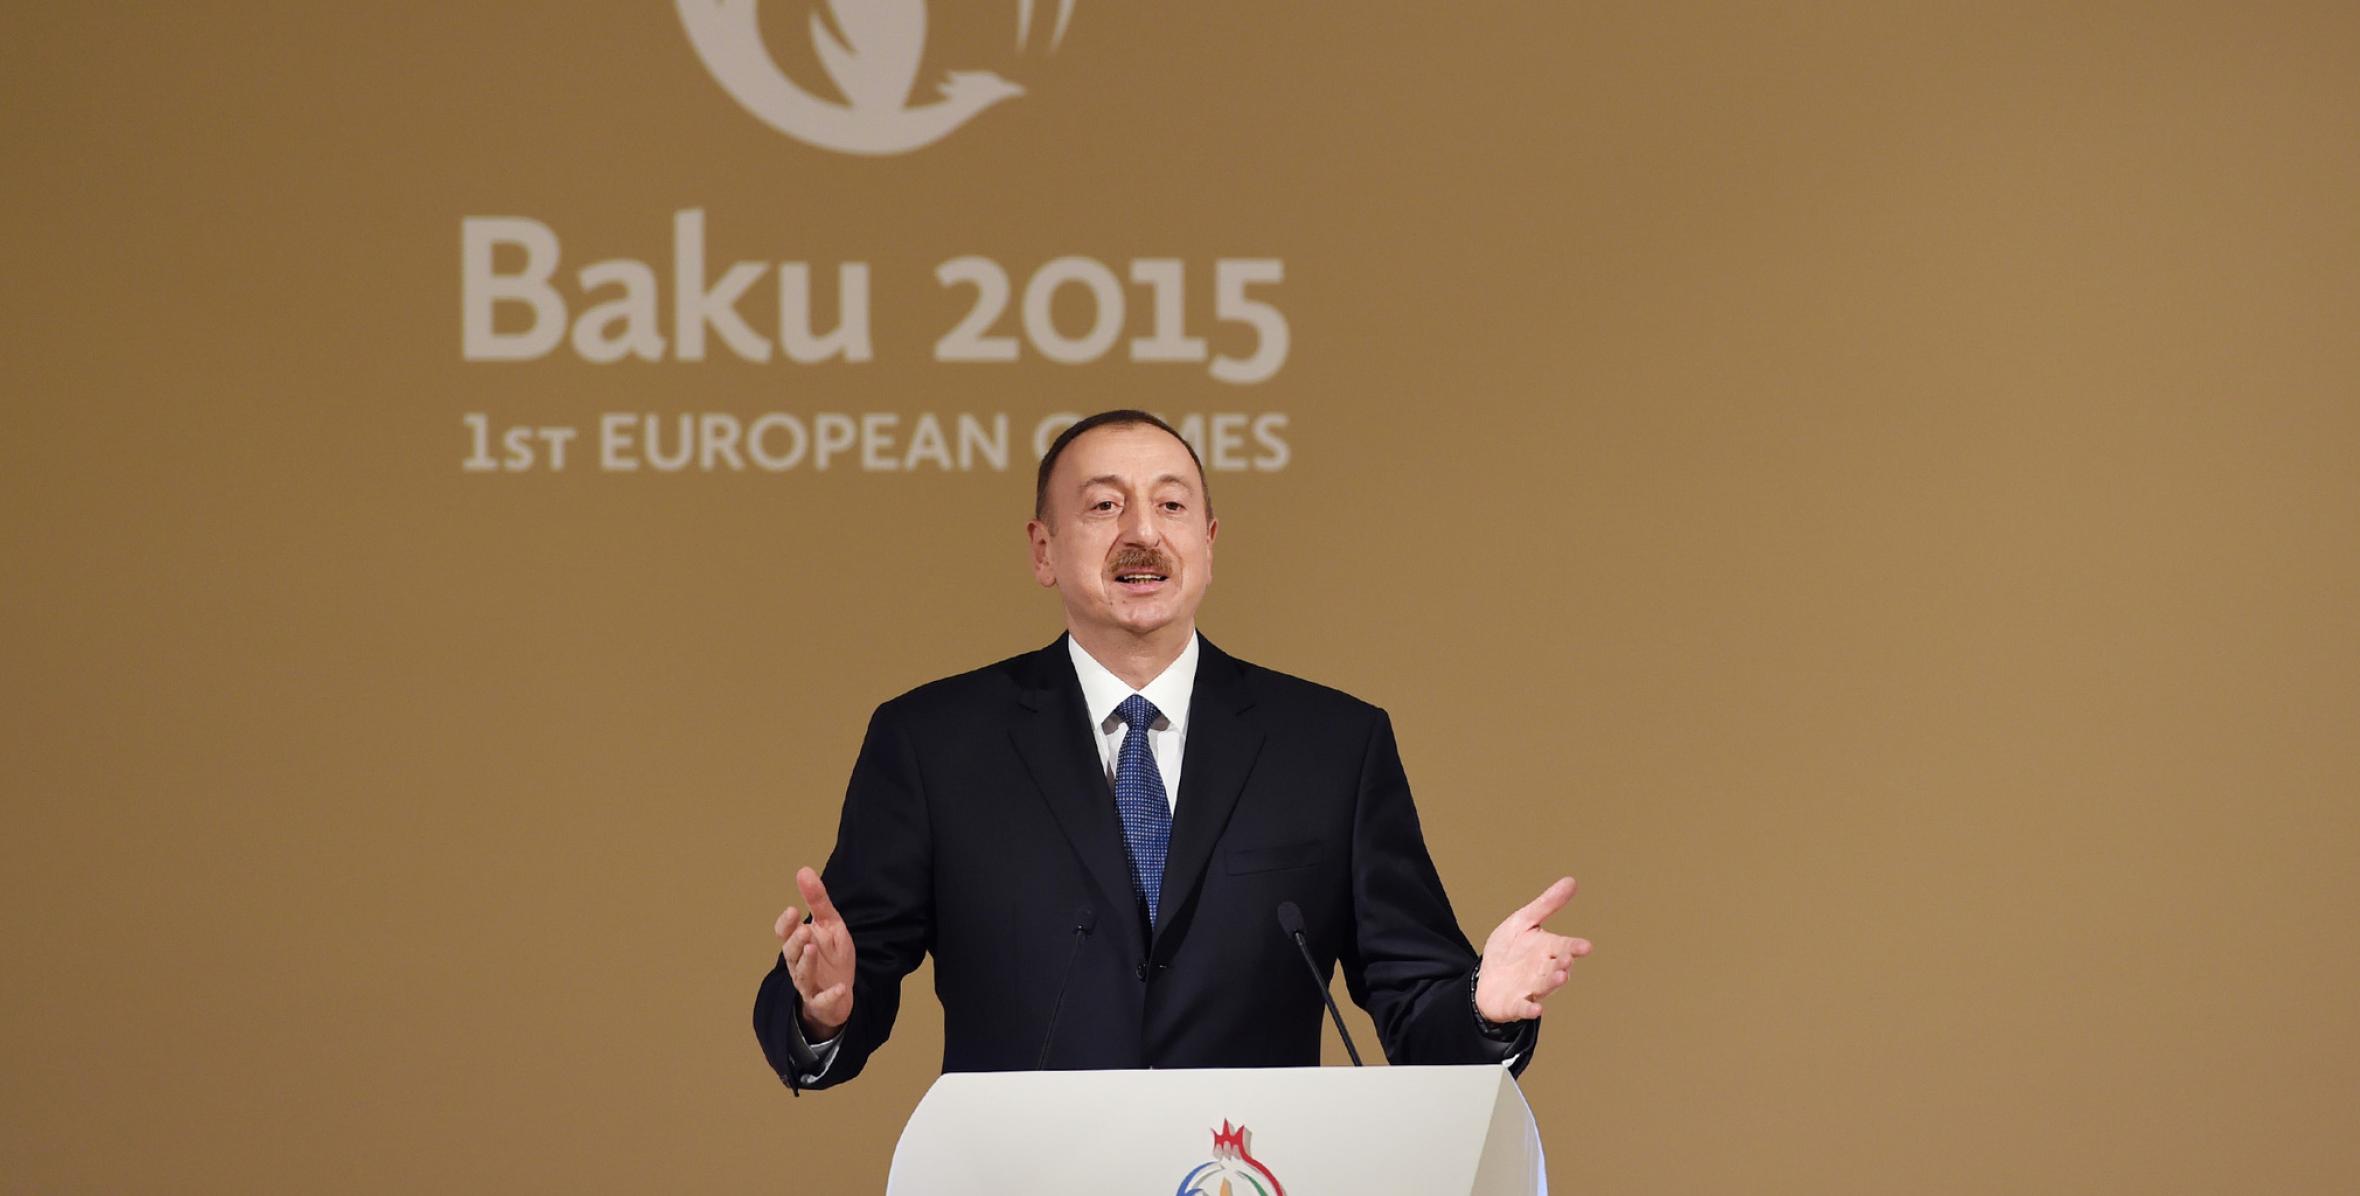 Speech by Ilham Aliyev at the award ceremony on the occasion of the First European Games